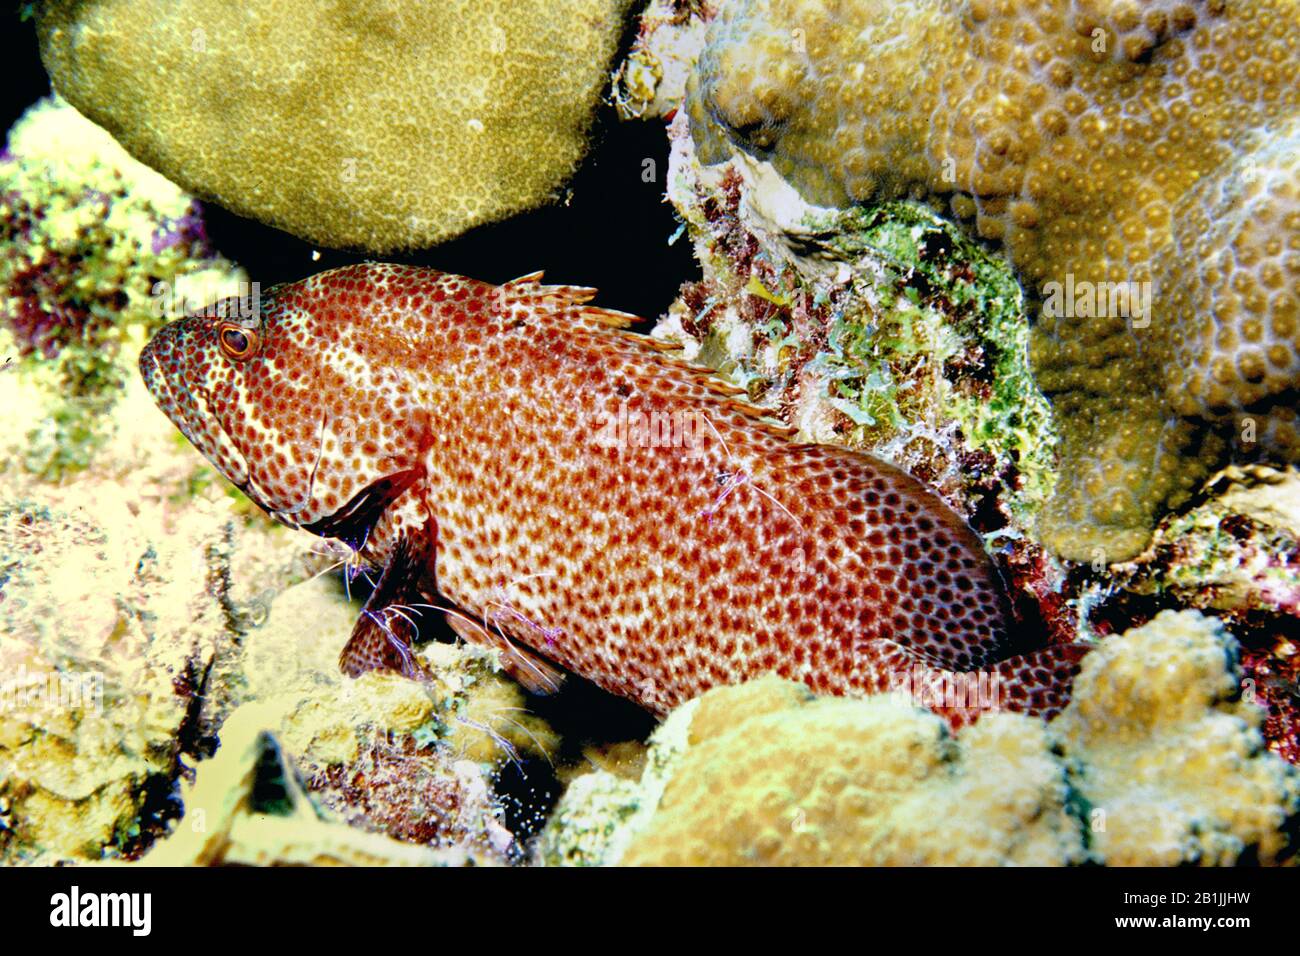 Graysby (Cephalopholis cruentata), lateral view, Netherlands Antilles, Curacao Stock Photo